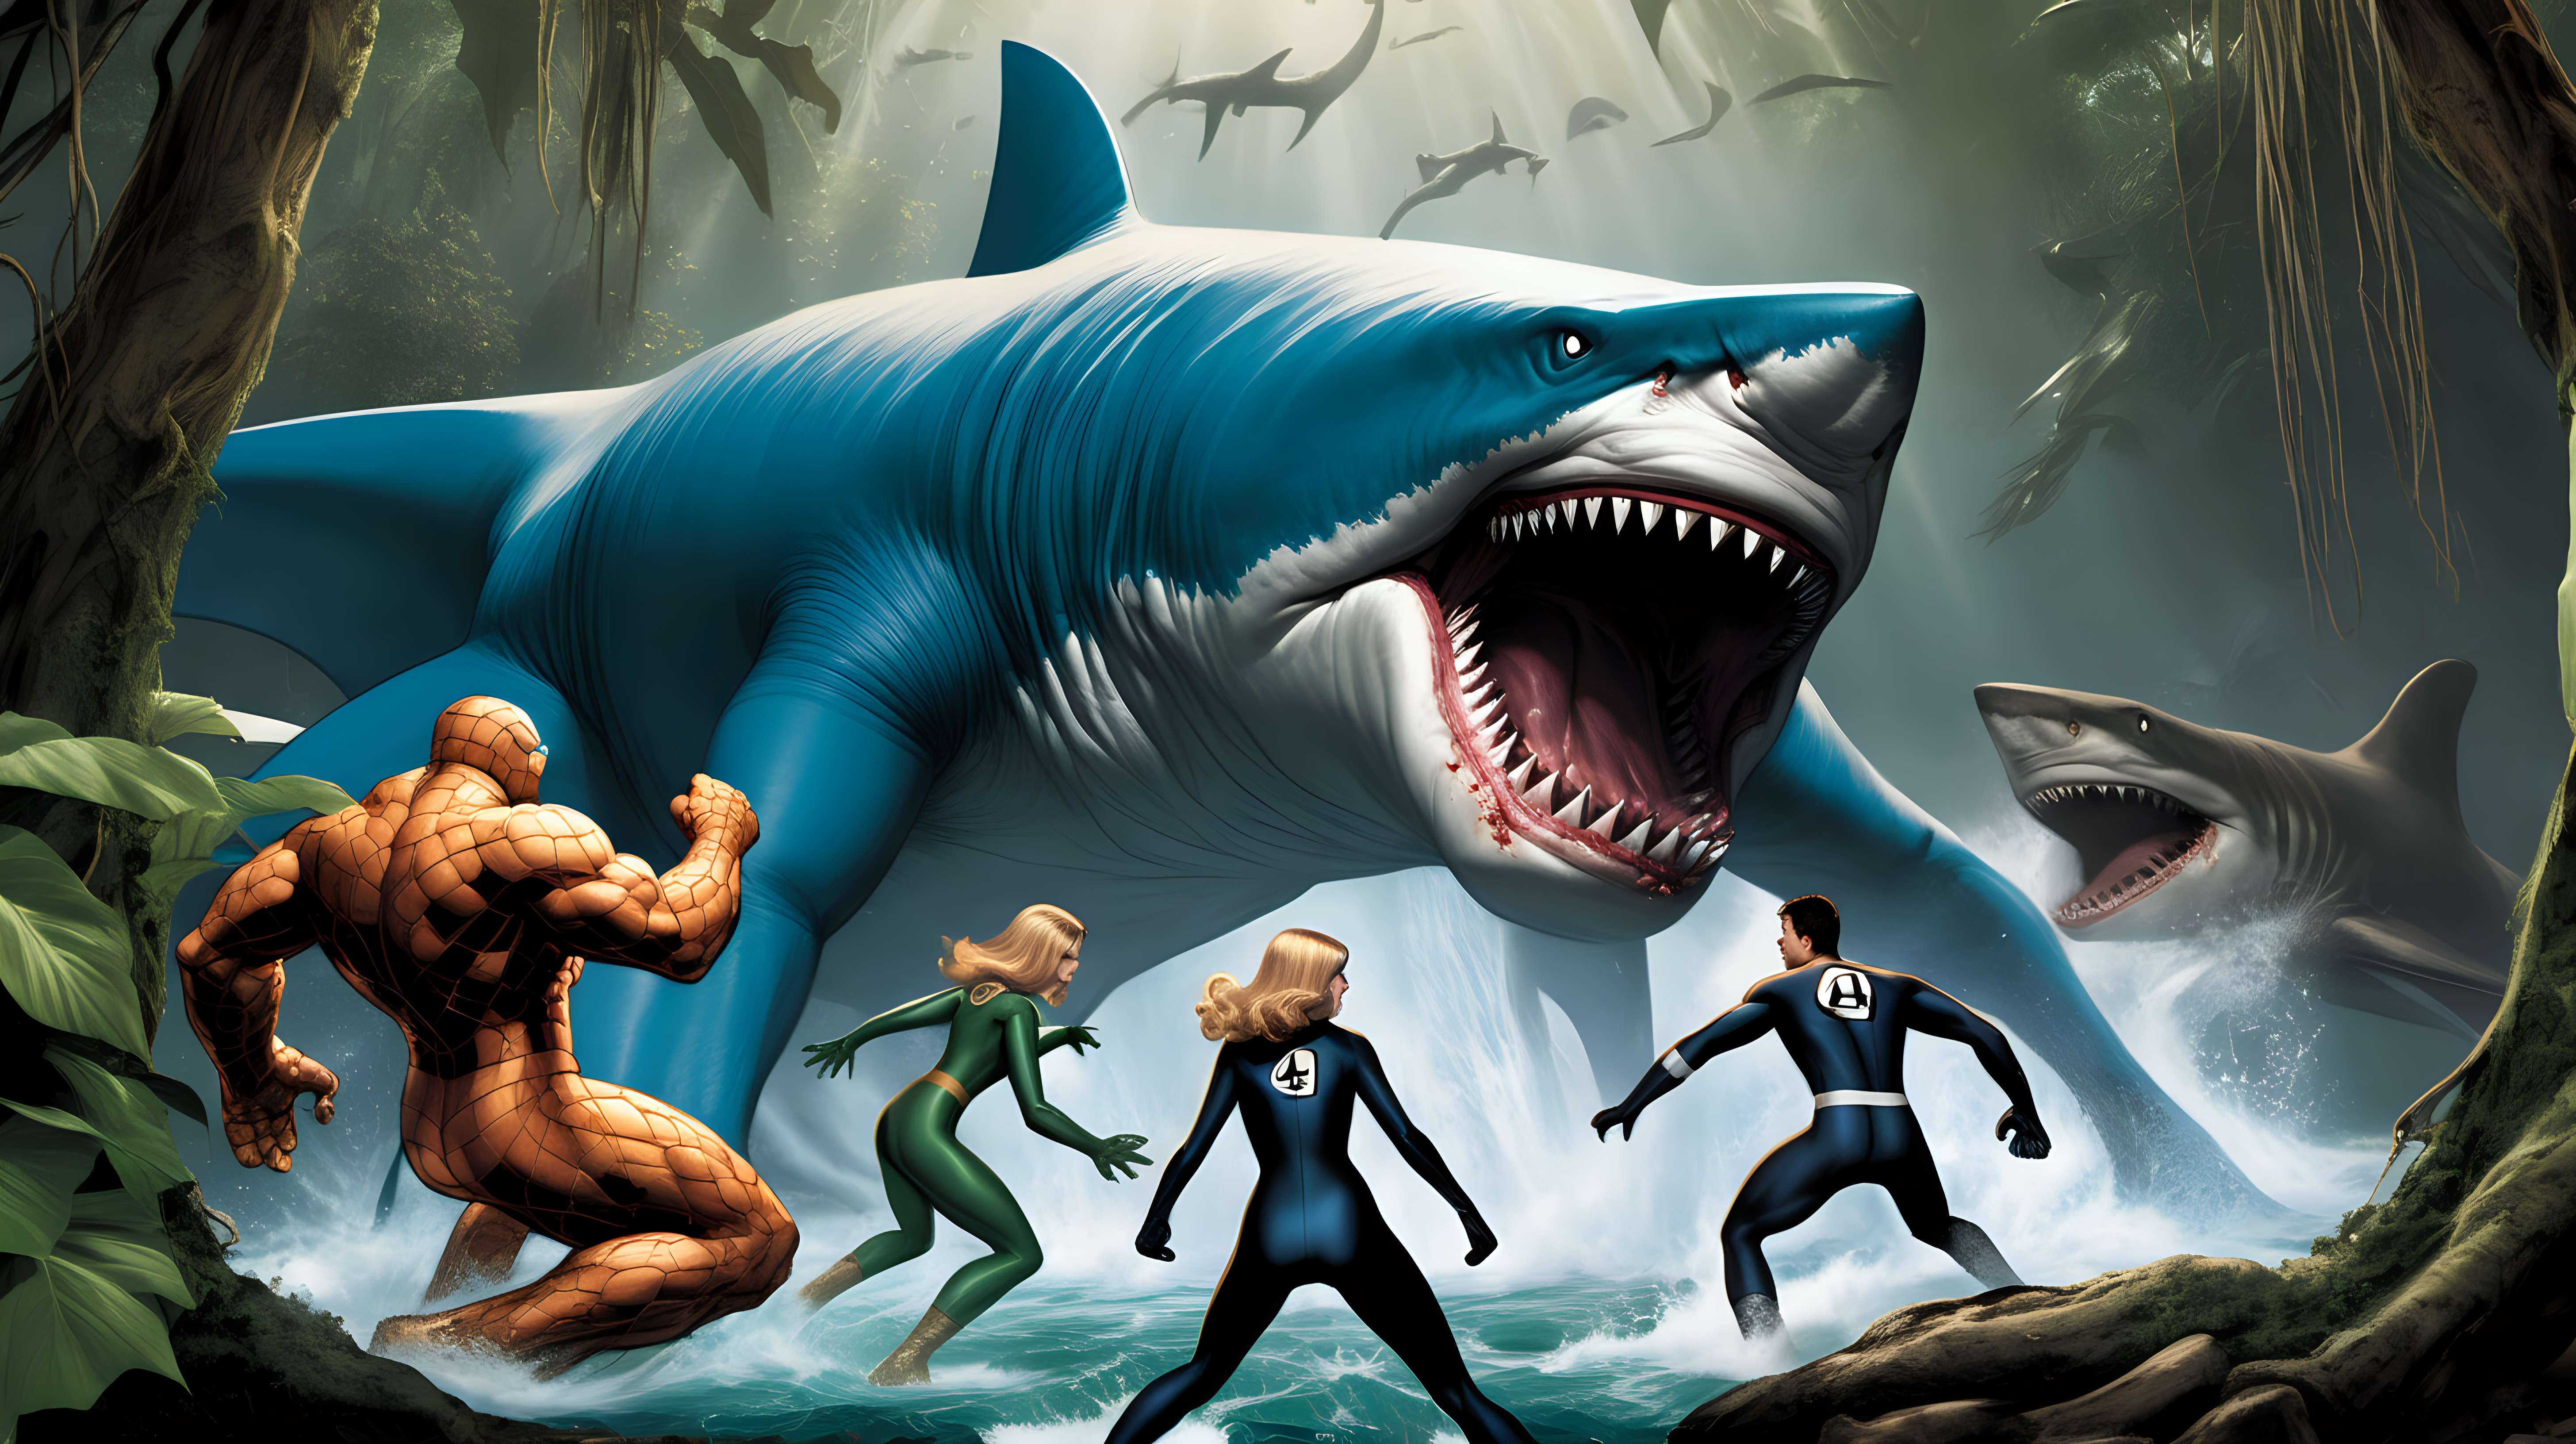 The Fantastic Four fights a giant shark with